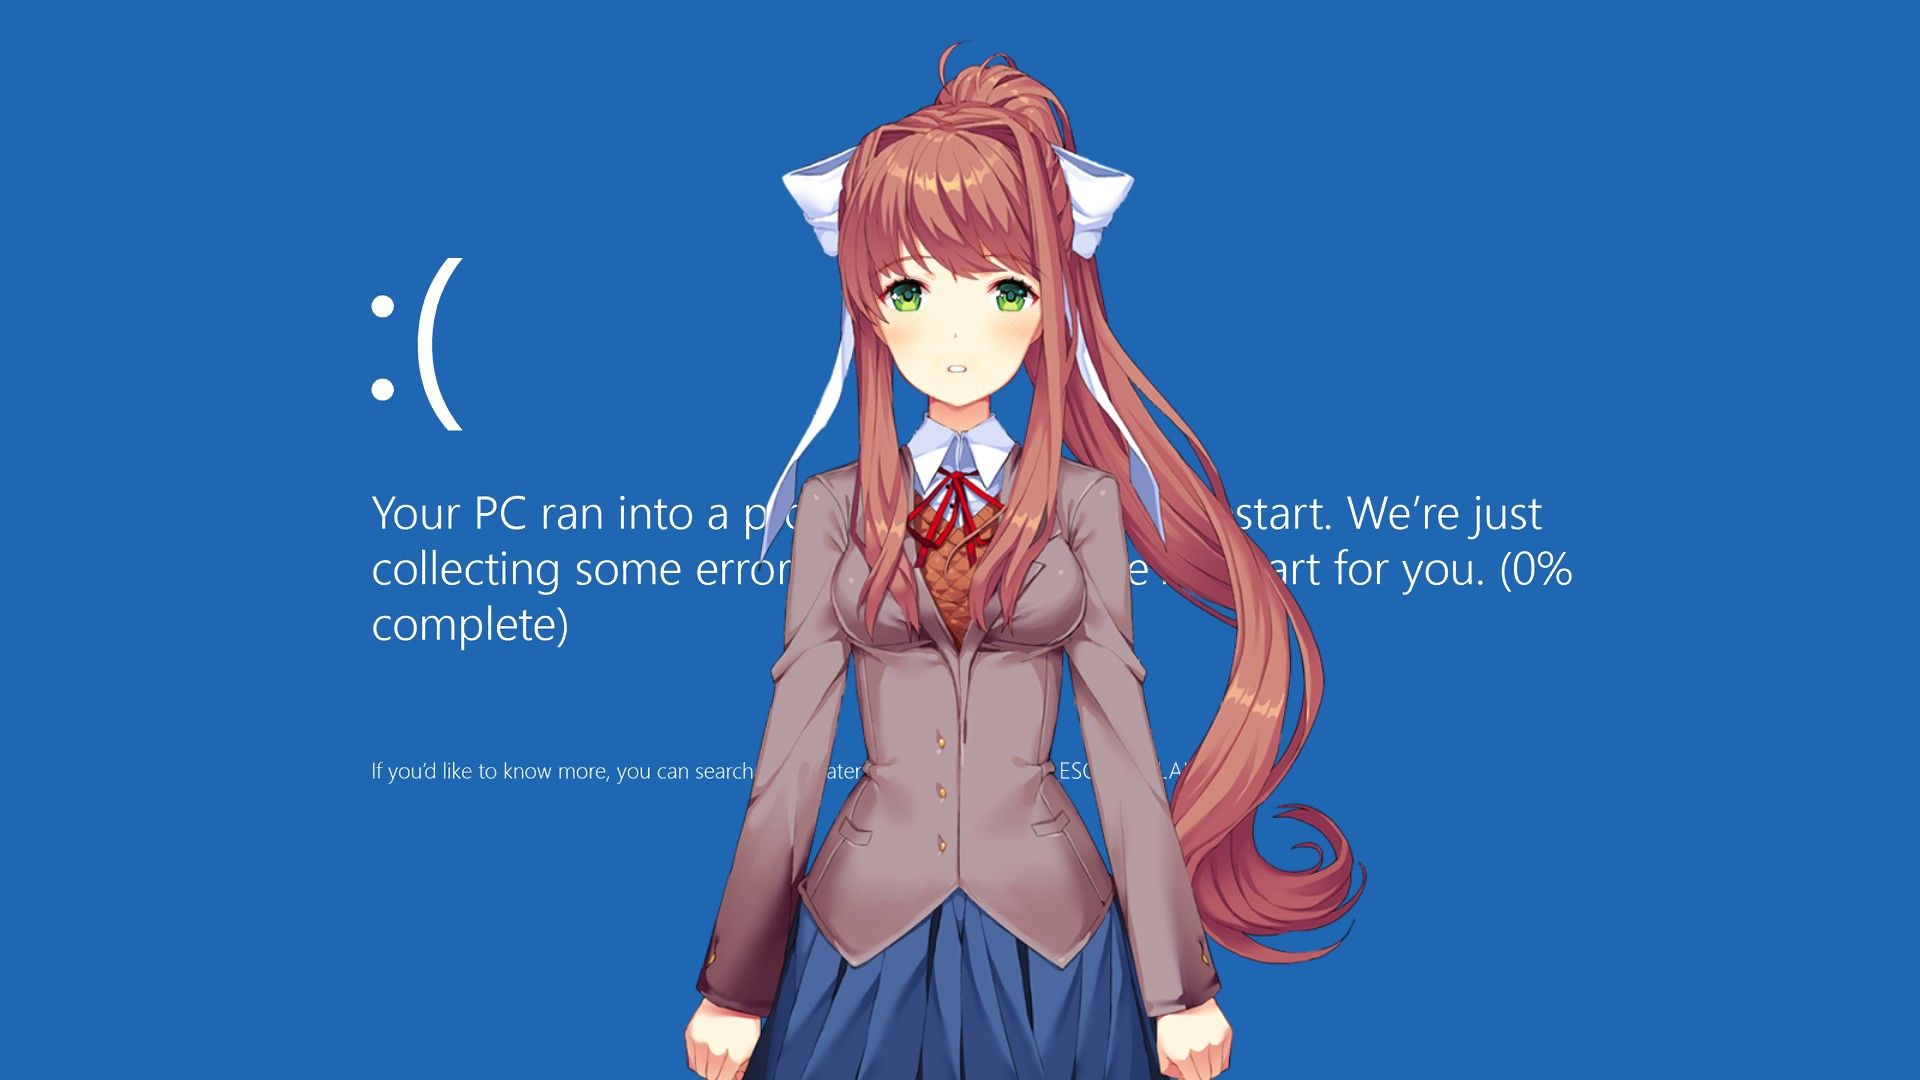 Steam Community - Guide - How to actually delete monika